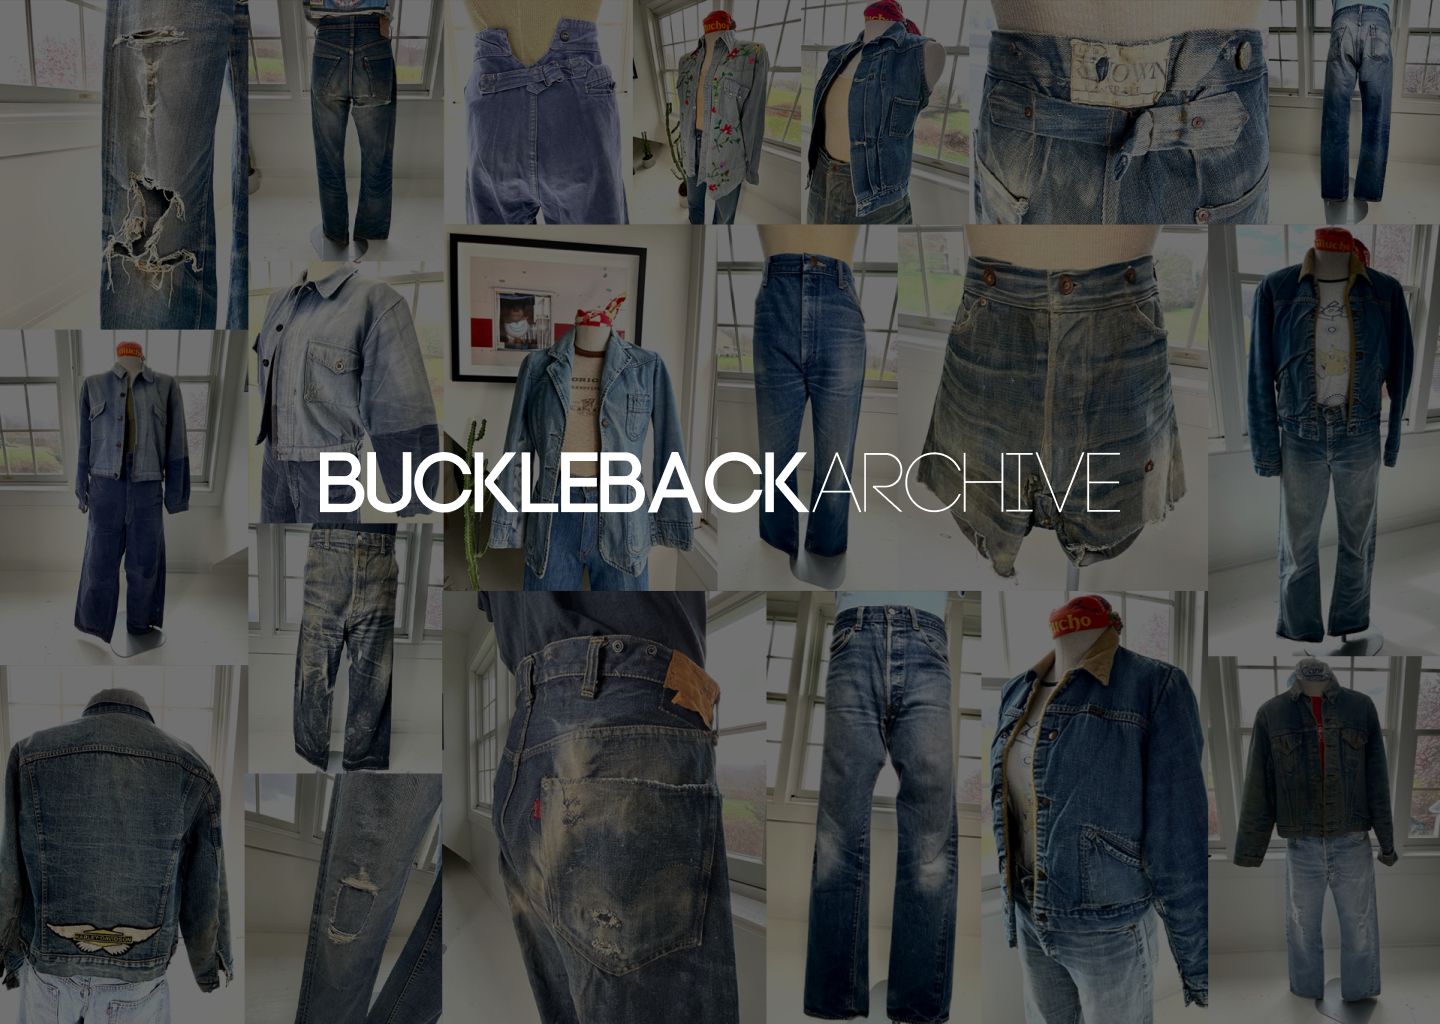 Buckleback Archive  Vintage items circa 1870 - 2000 are available